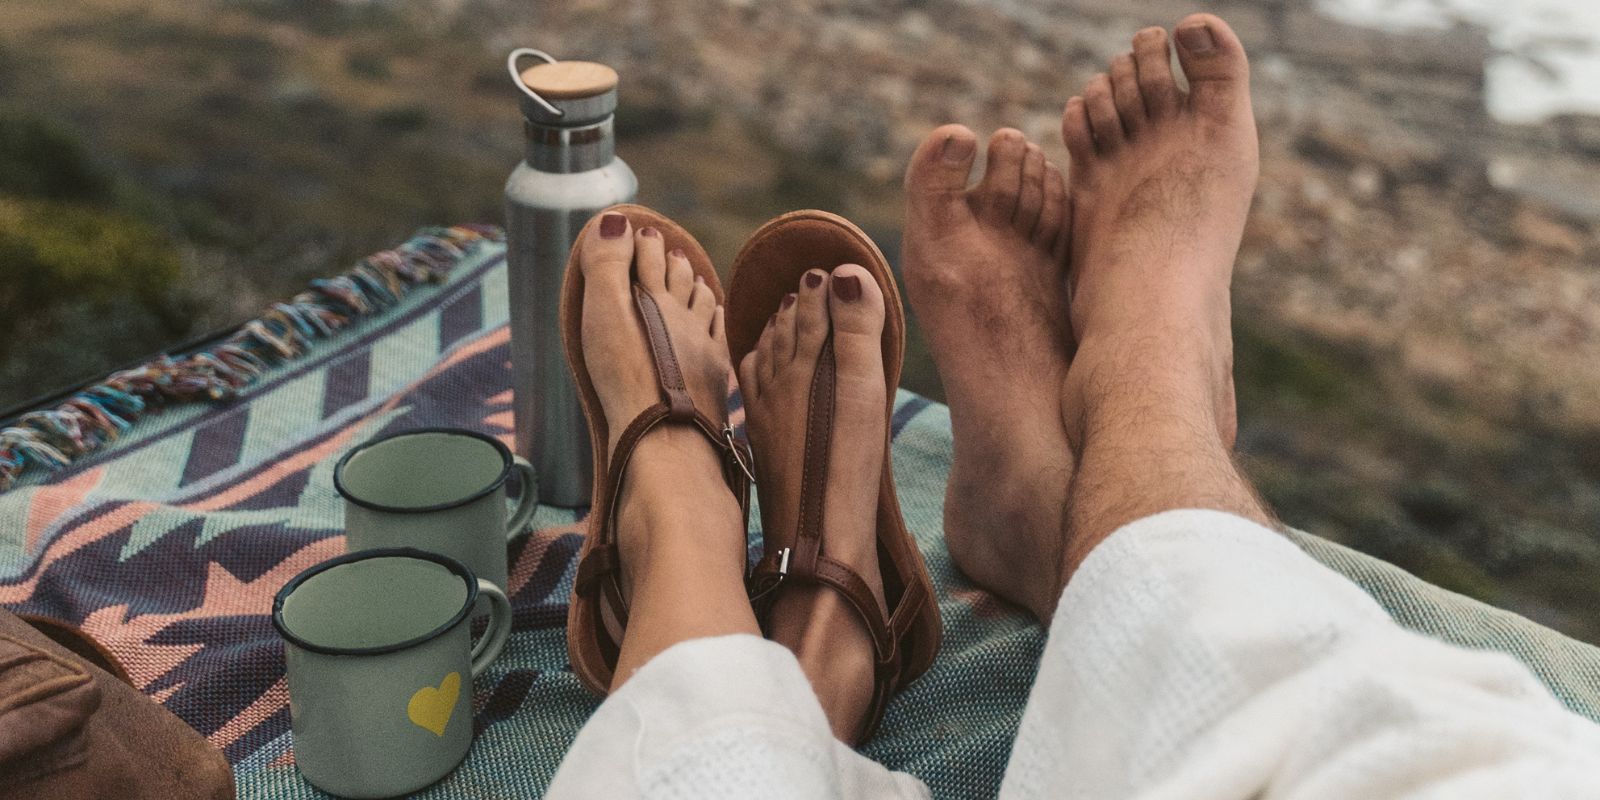 Female legs with sandals right next to a man who is barefeet and has them crossed over each other sitted in a picnic setting